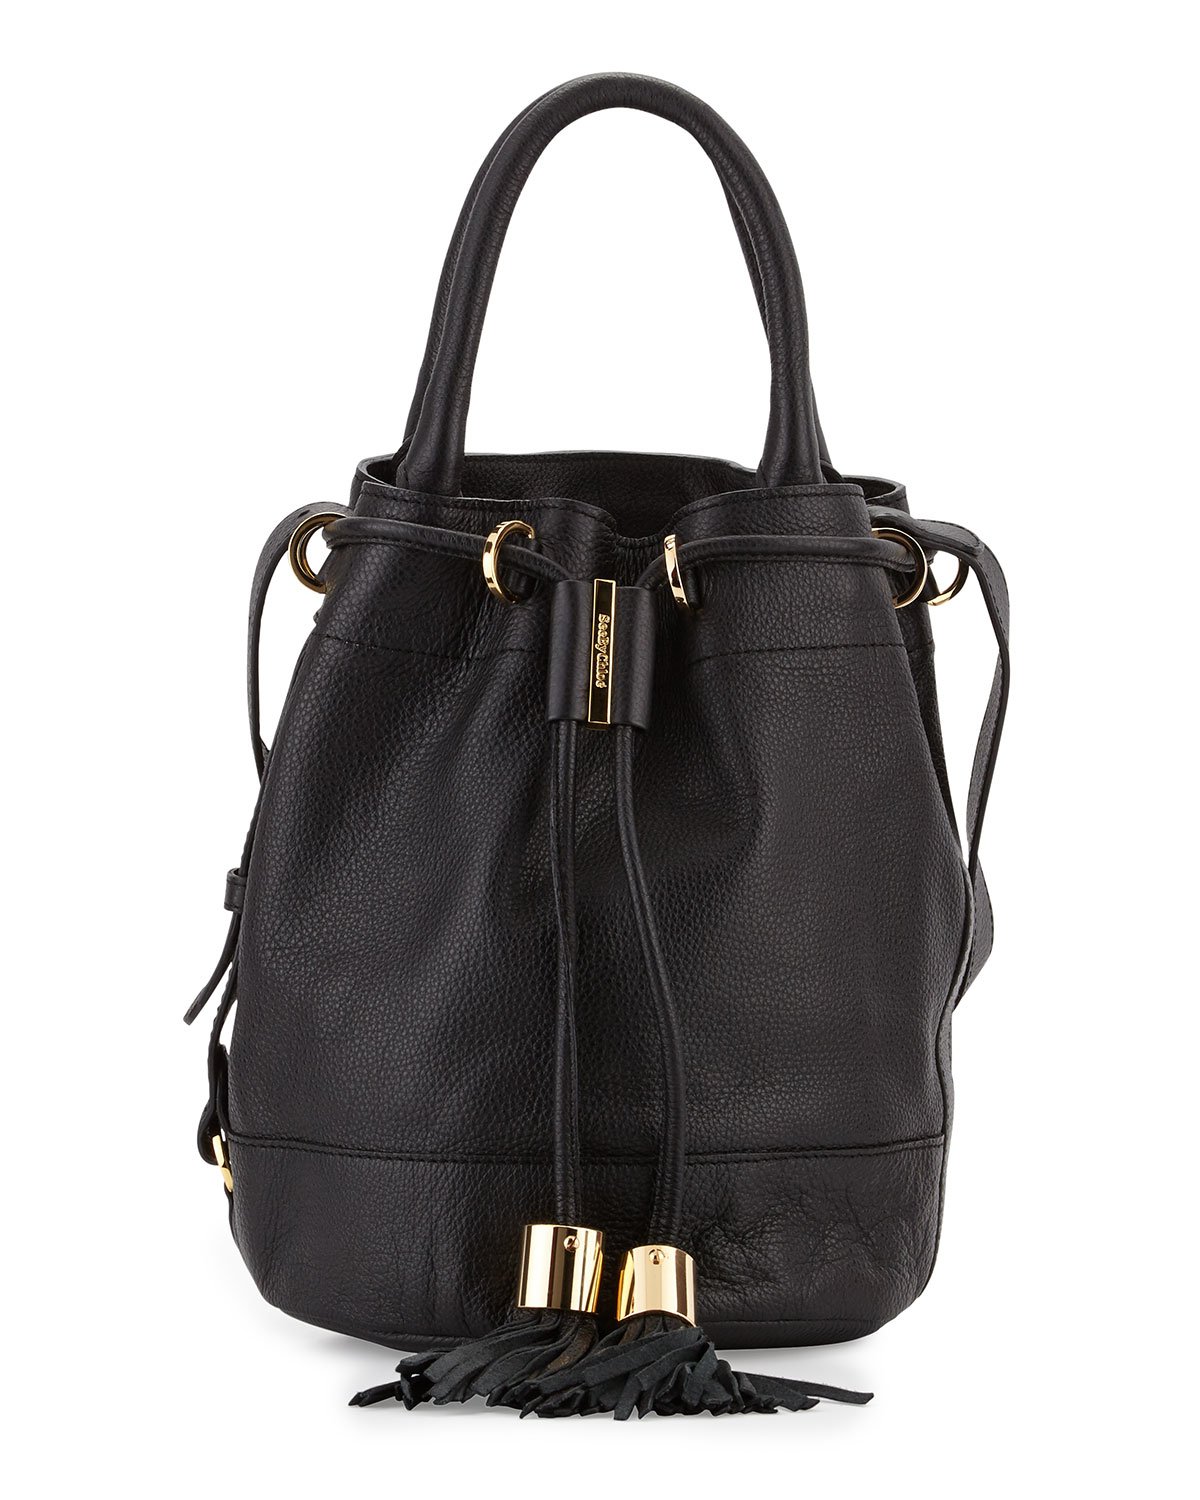 See by chlo Vicki Leather Bucket Bag in Black | Lyst  